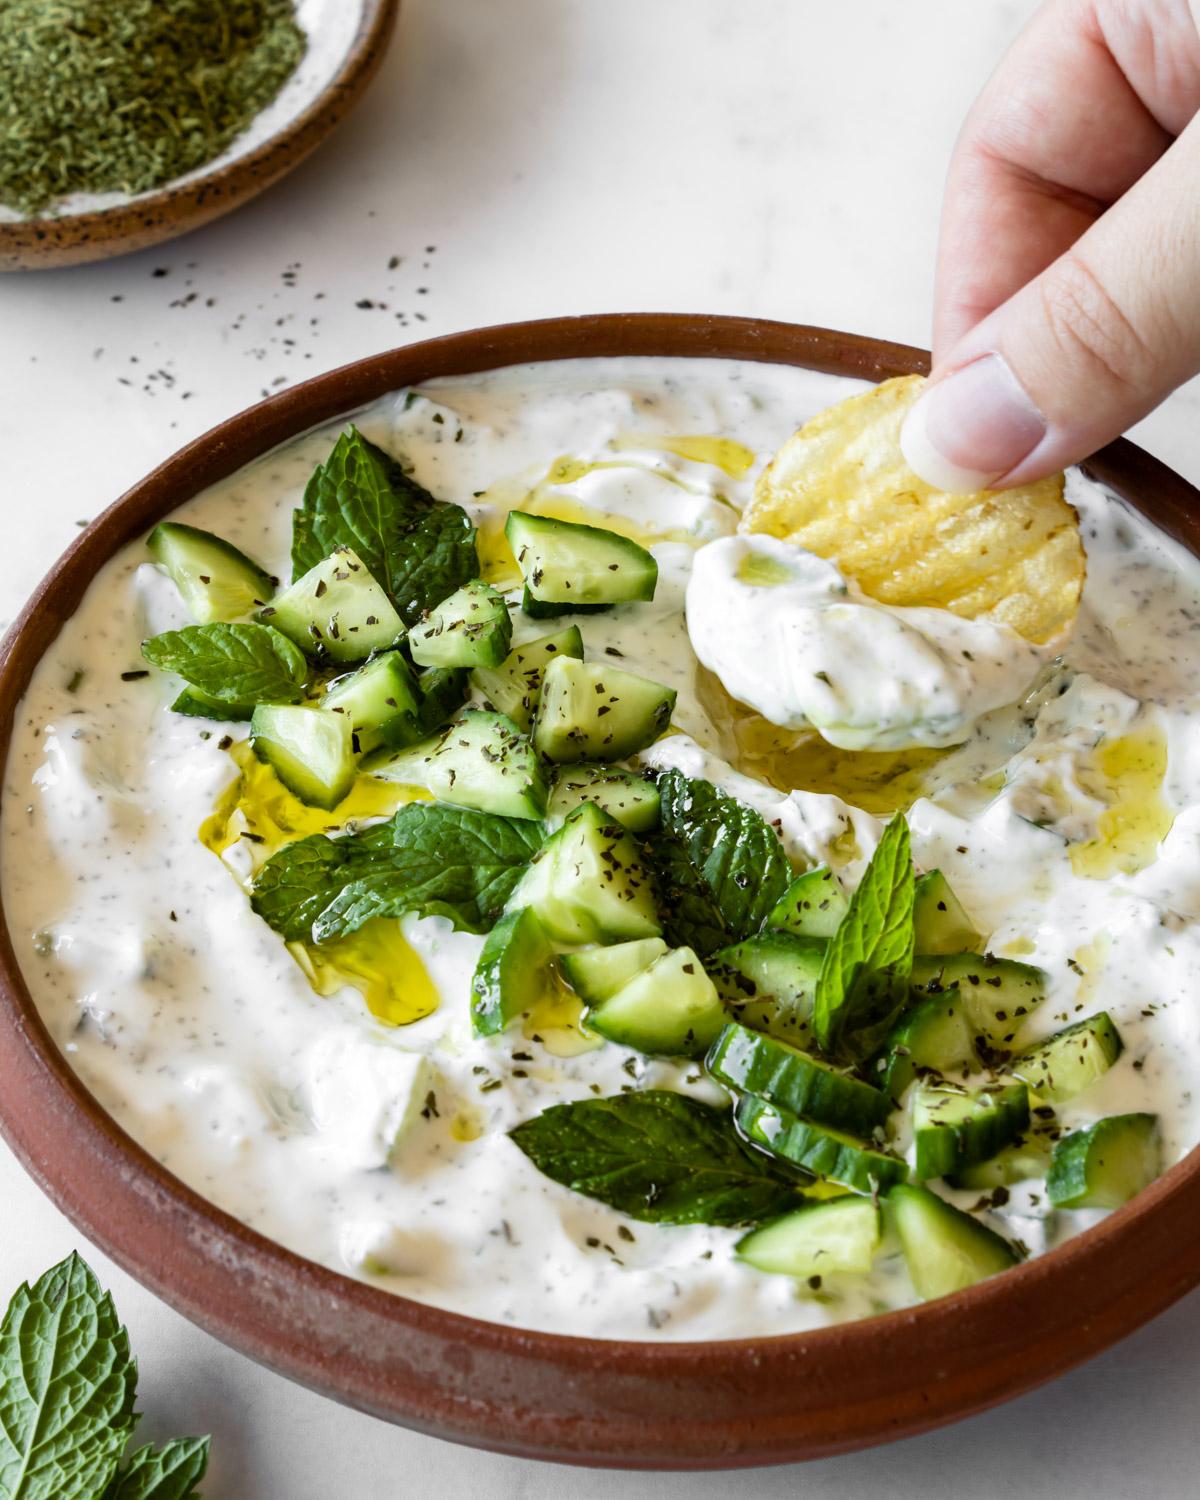 Enjoy this fresh-tasting dip with a bag of chips or toast for a satisfying lunch. (via <a href="https://forksandfoliage.com/cucumber-mint-yogurt-salad-cacik/"><strong>Forks & Foliage</strong></a>)